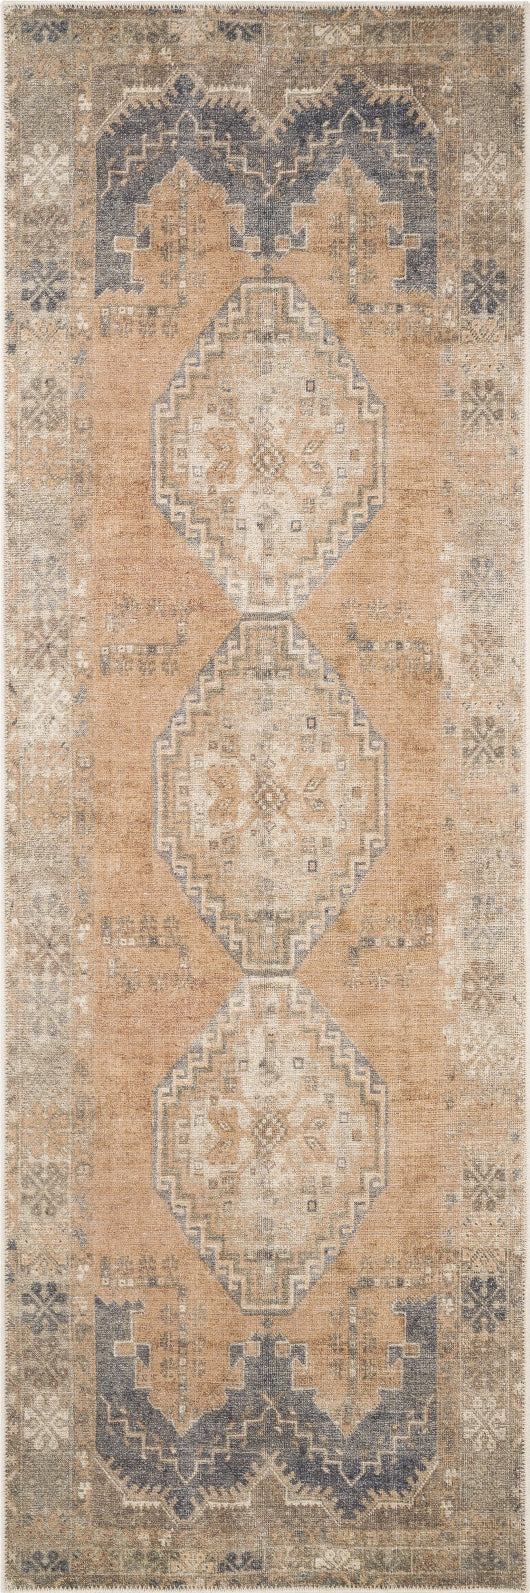 Surya Antiquity AUY-2305 Area Rug by Artistic Weavers